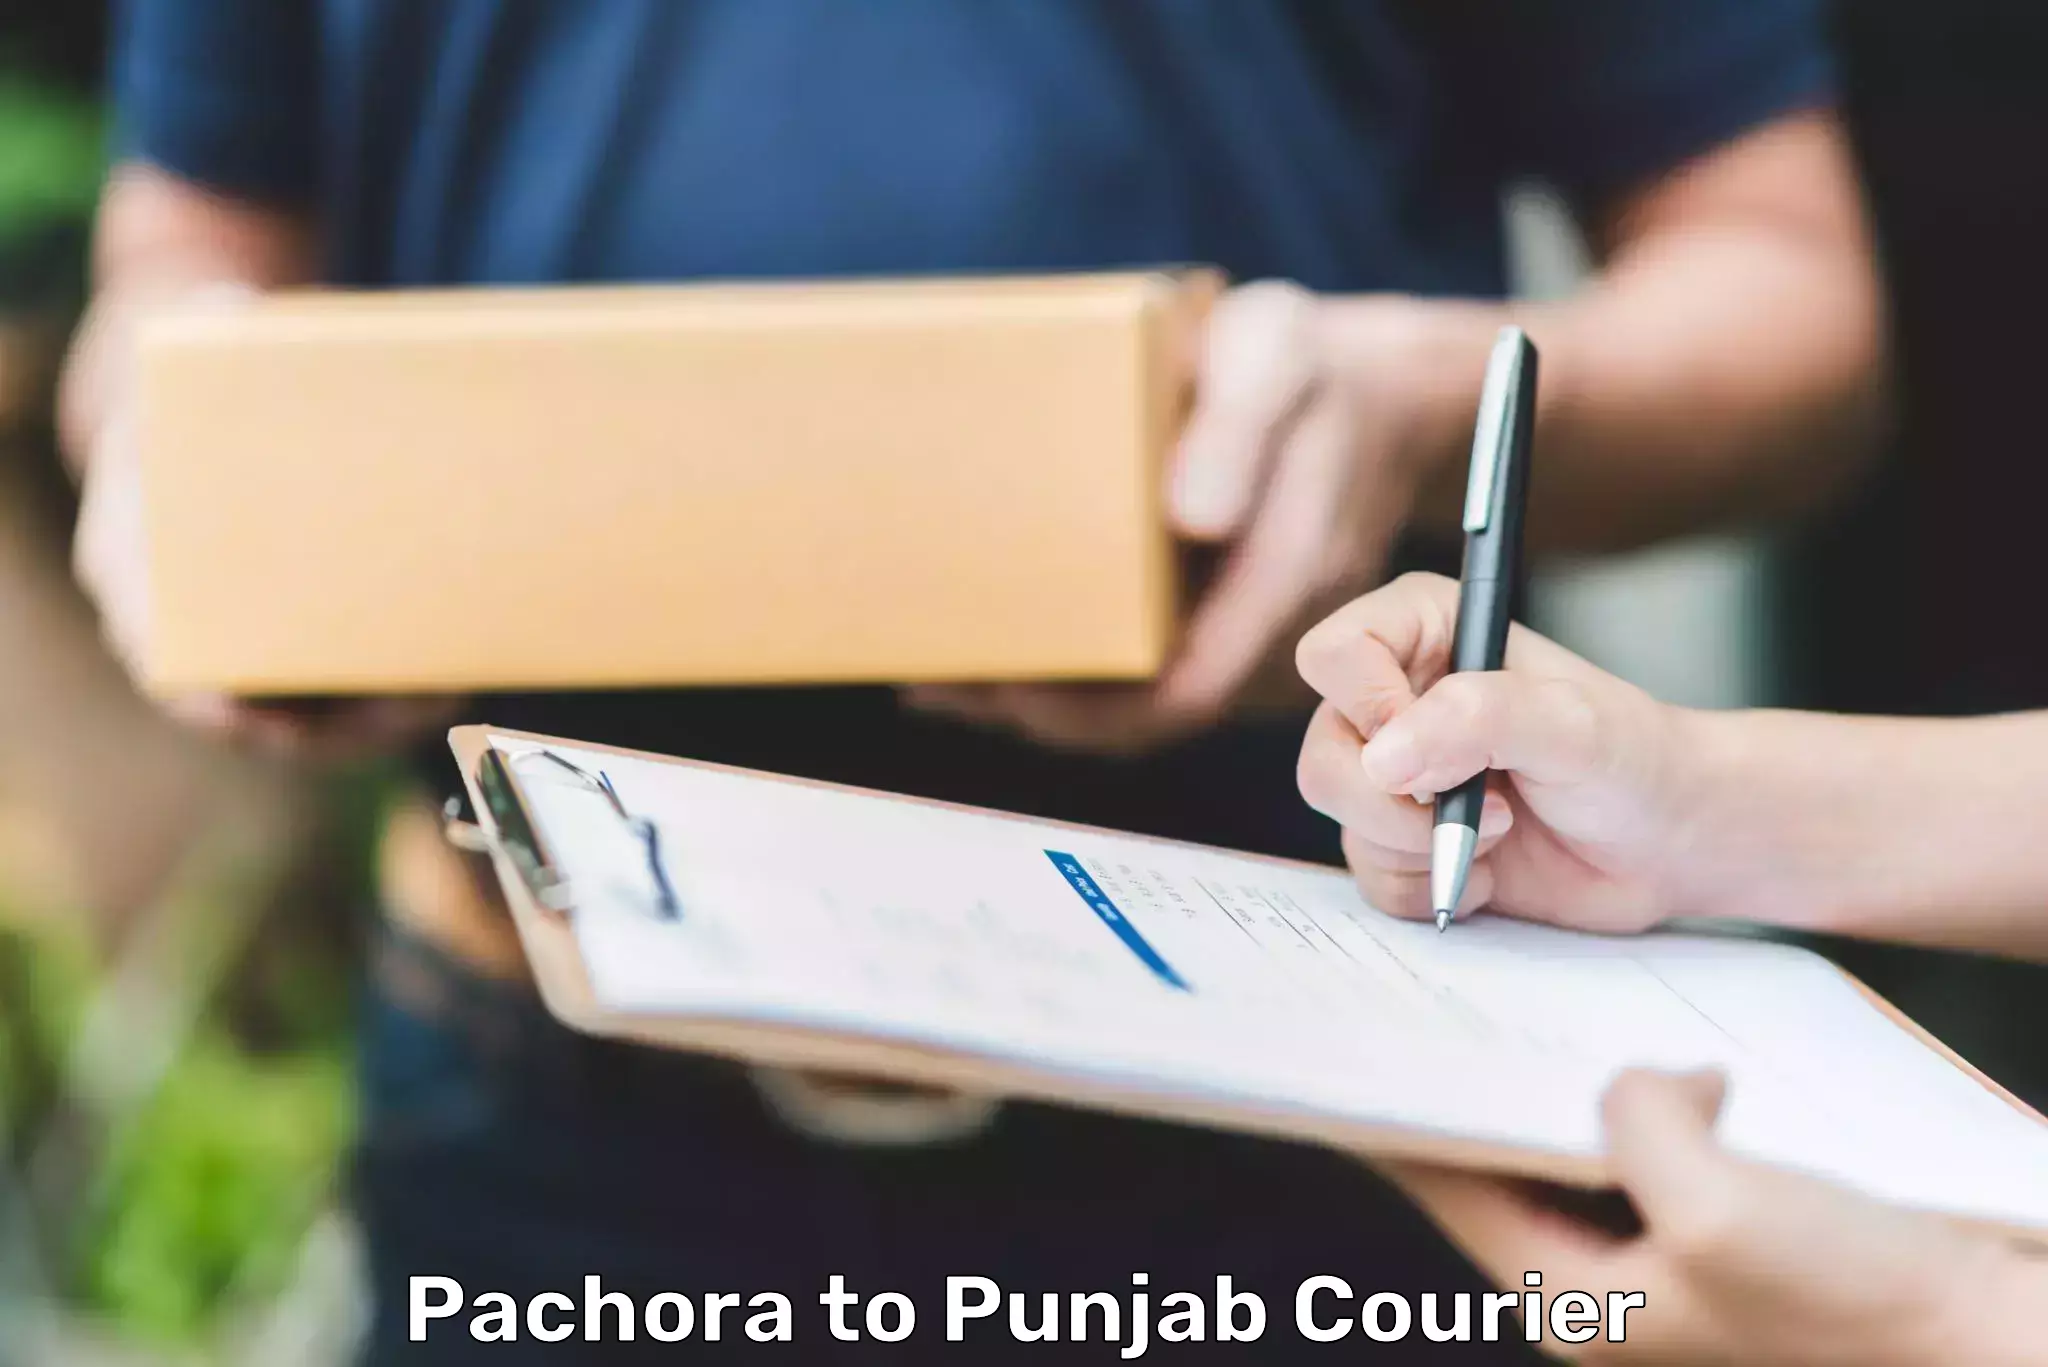 Courier service booking Pachora to Sultanpur Lodhi